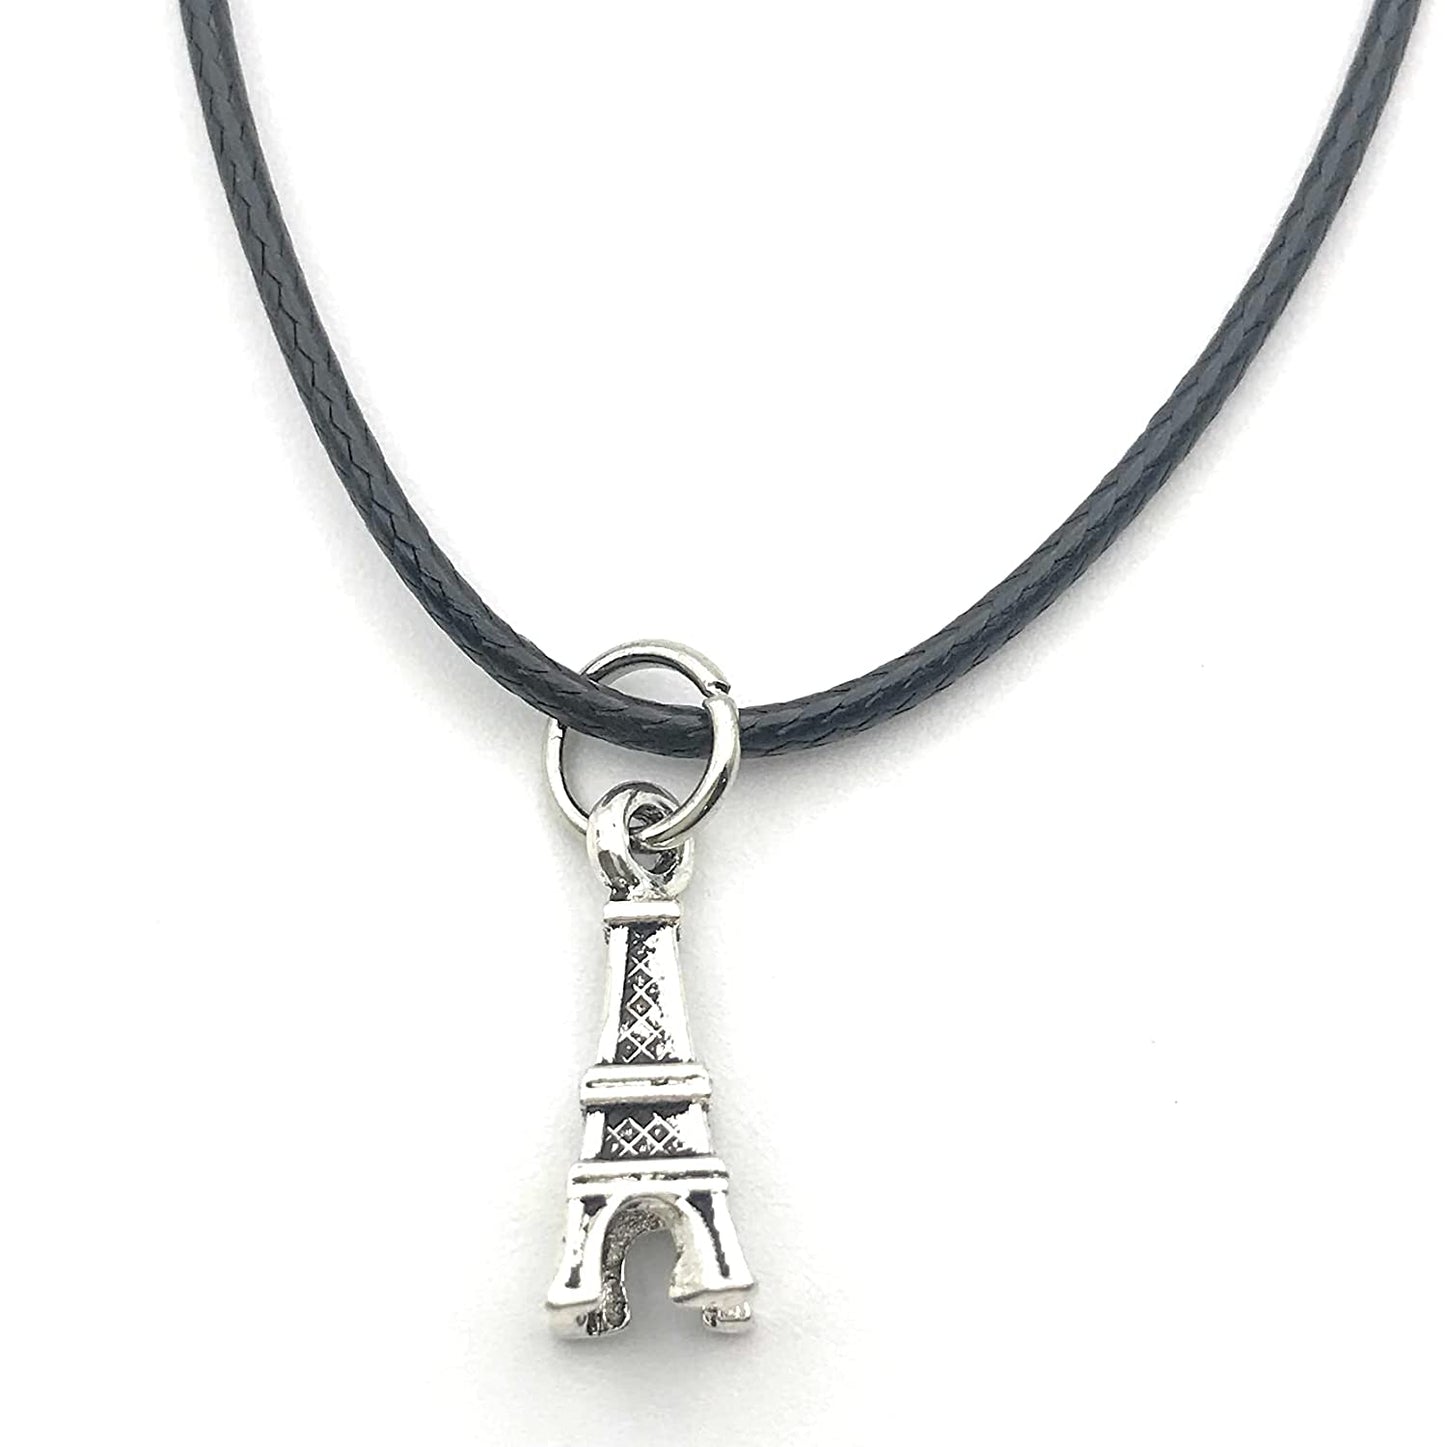 Eiffel Tower Cotton Cord Necklace from Scott D Jewelry Designs